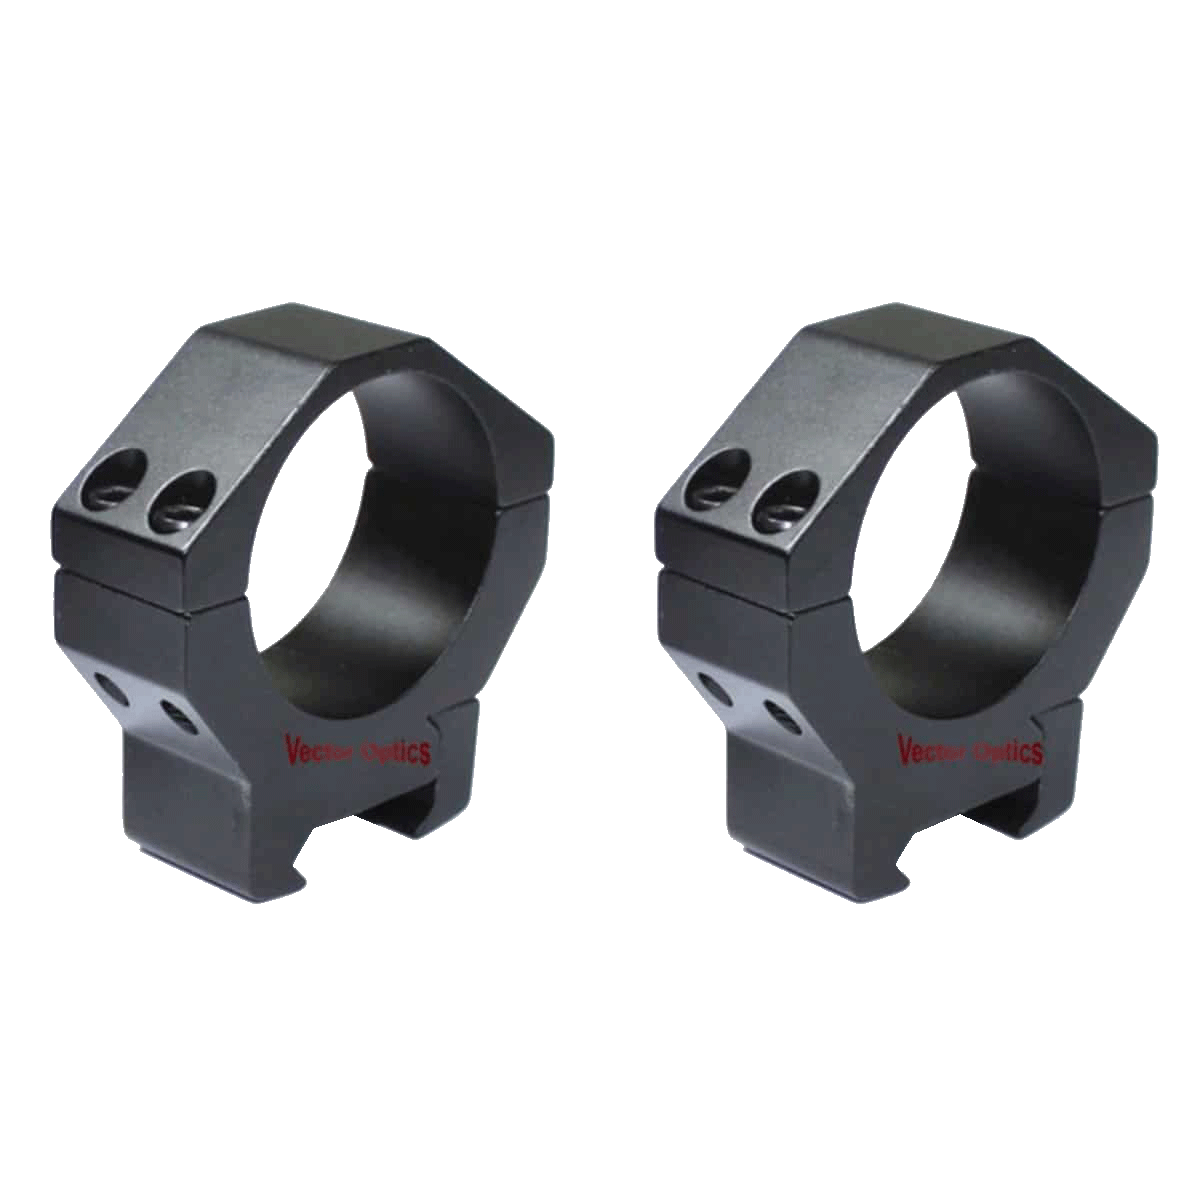 35mm Tactical Low Picatinny Mount Rings